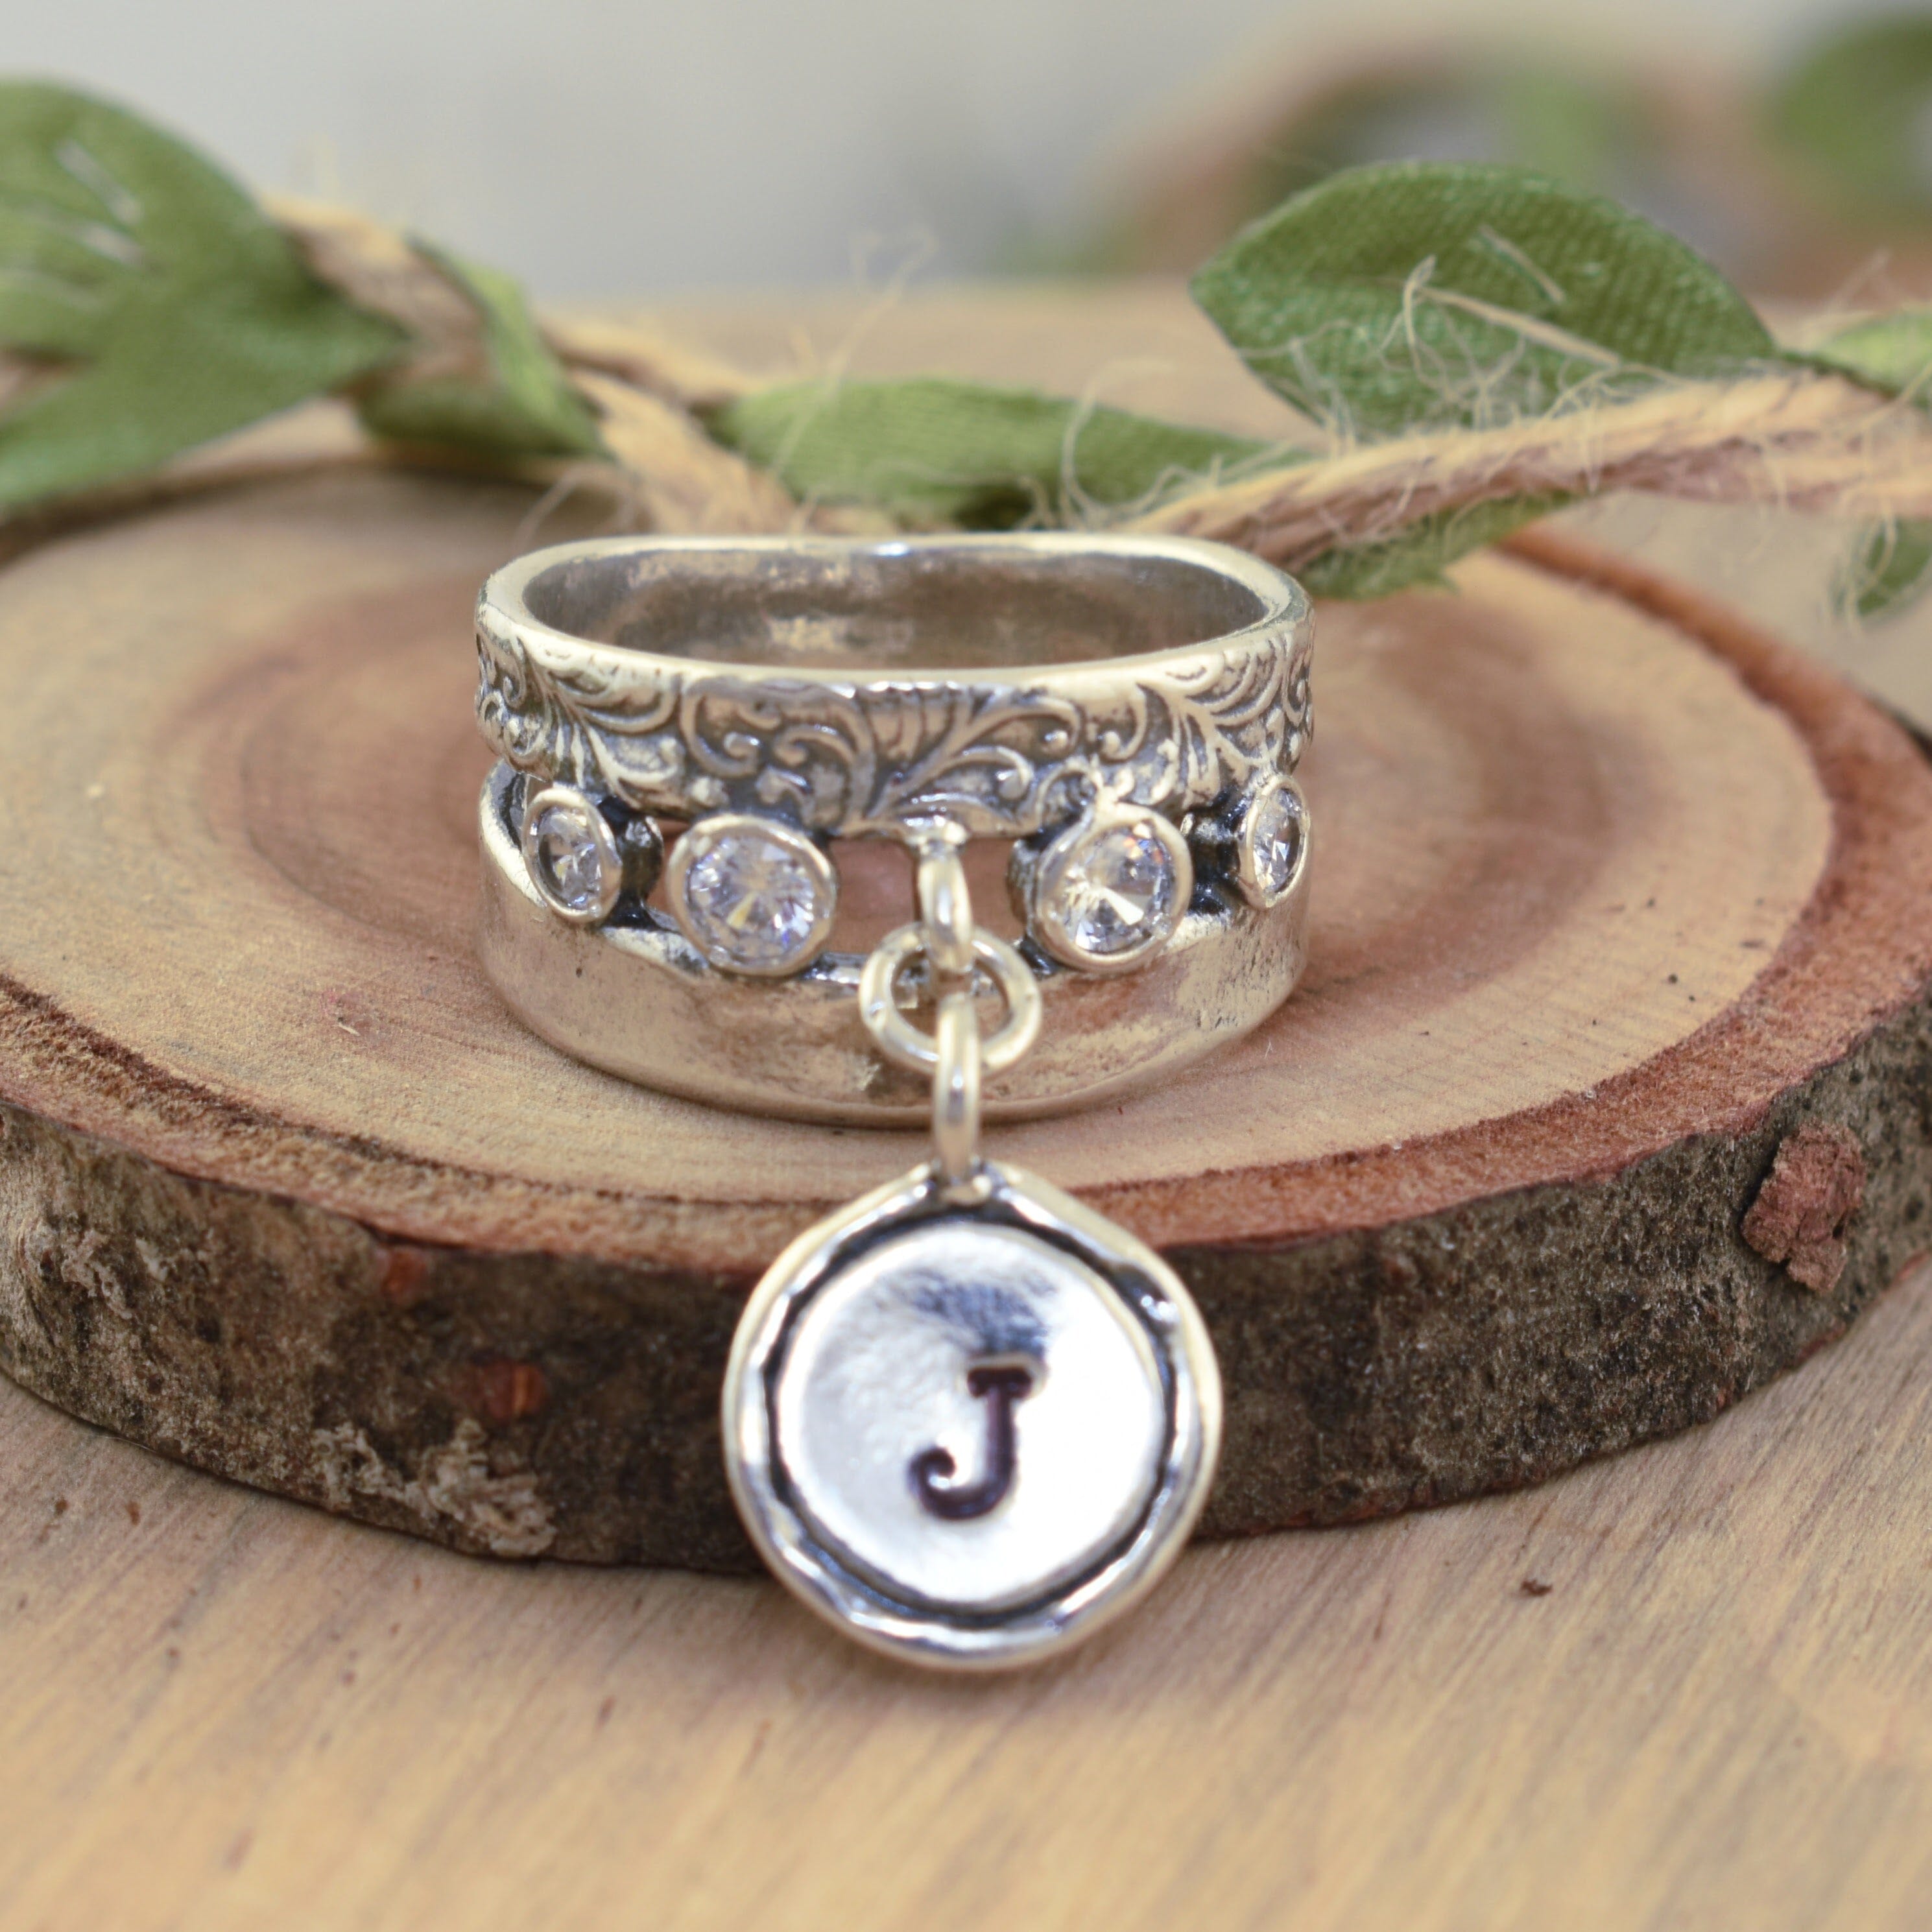 Sterling silver and CZ ring with personalized initial dangle